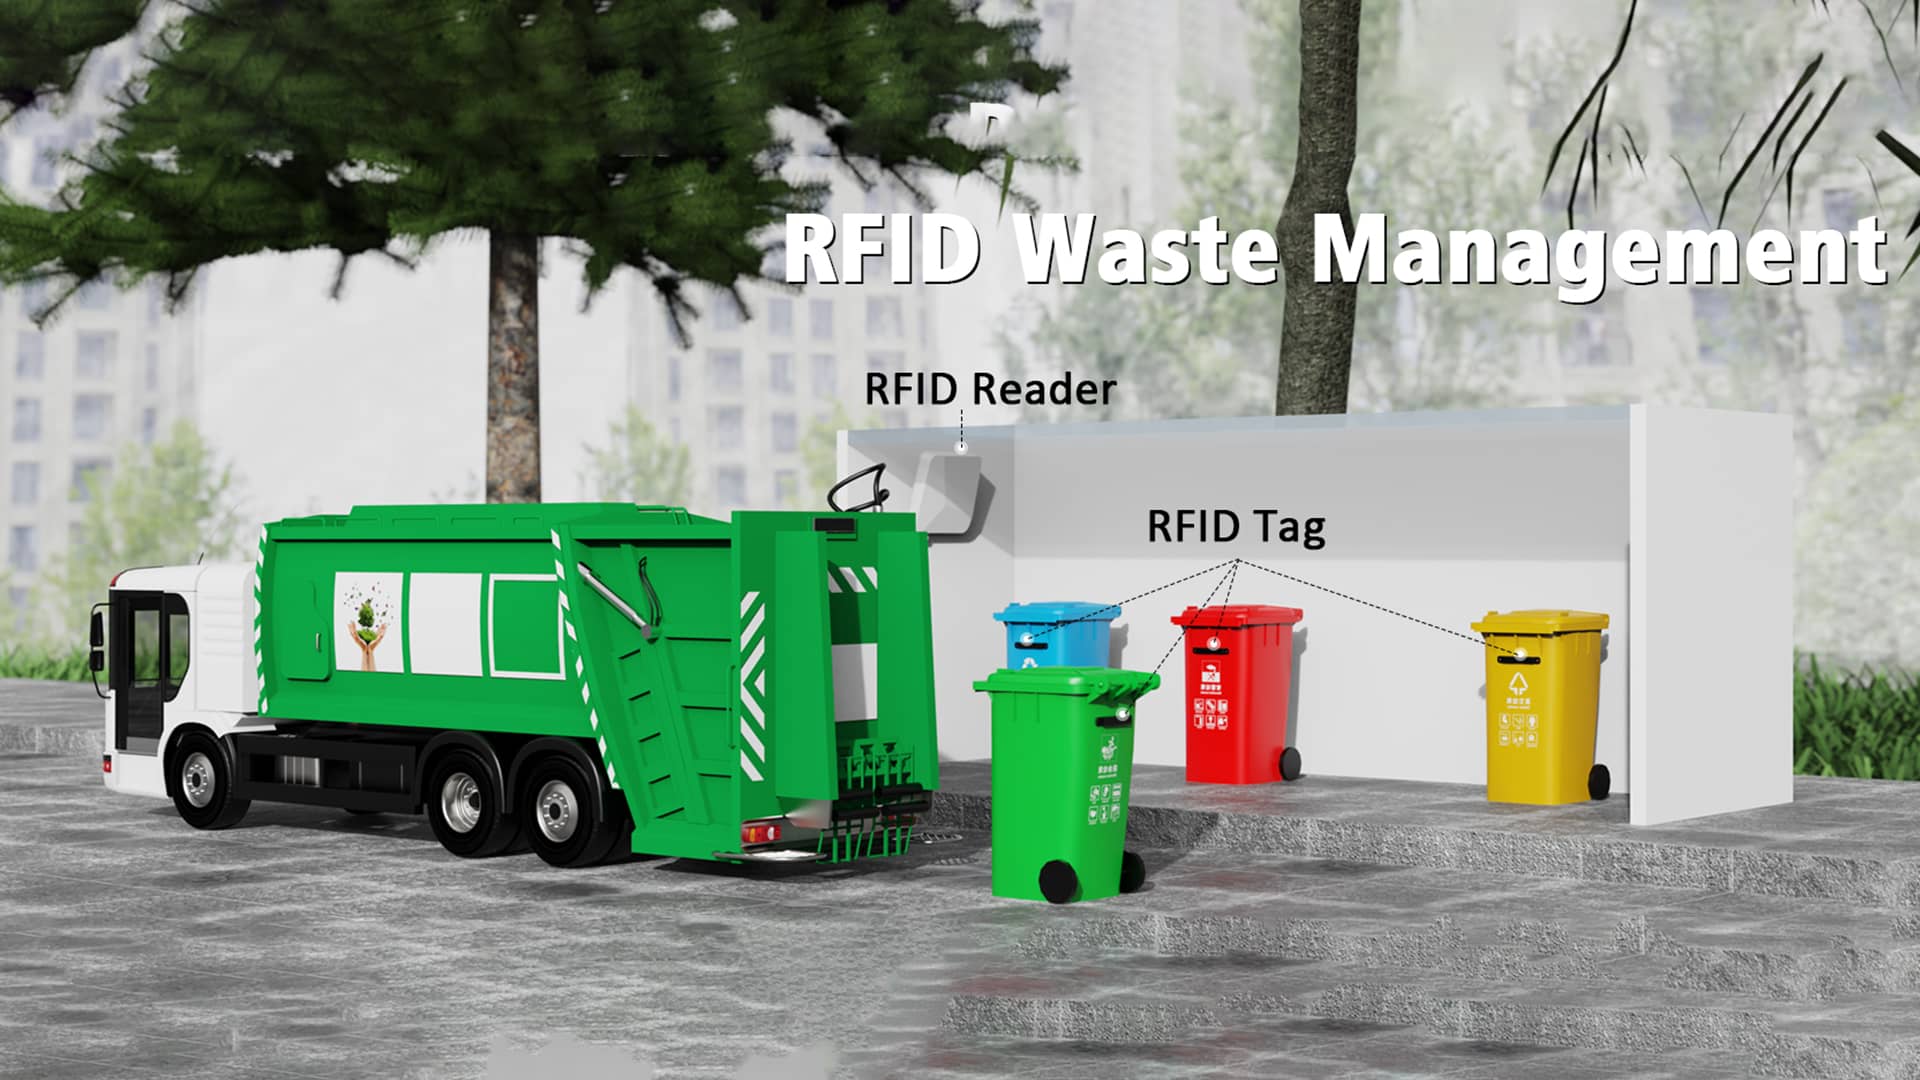 Smart Trash Bins: How RFID Tech is Revolutionizing Waste Data Collection!